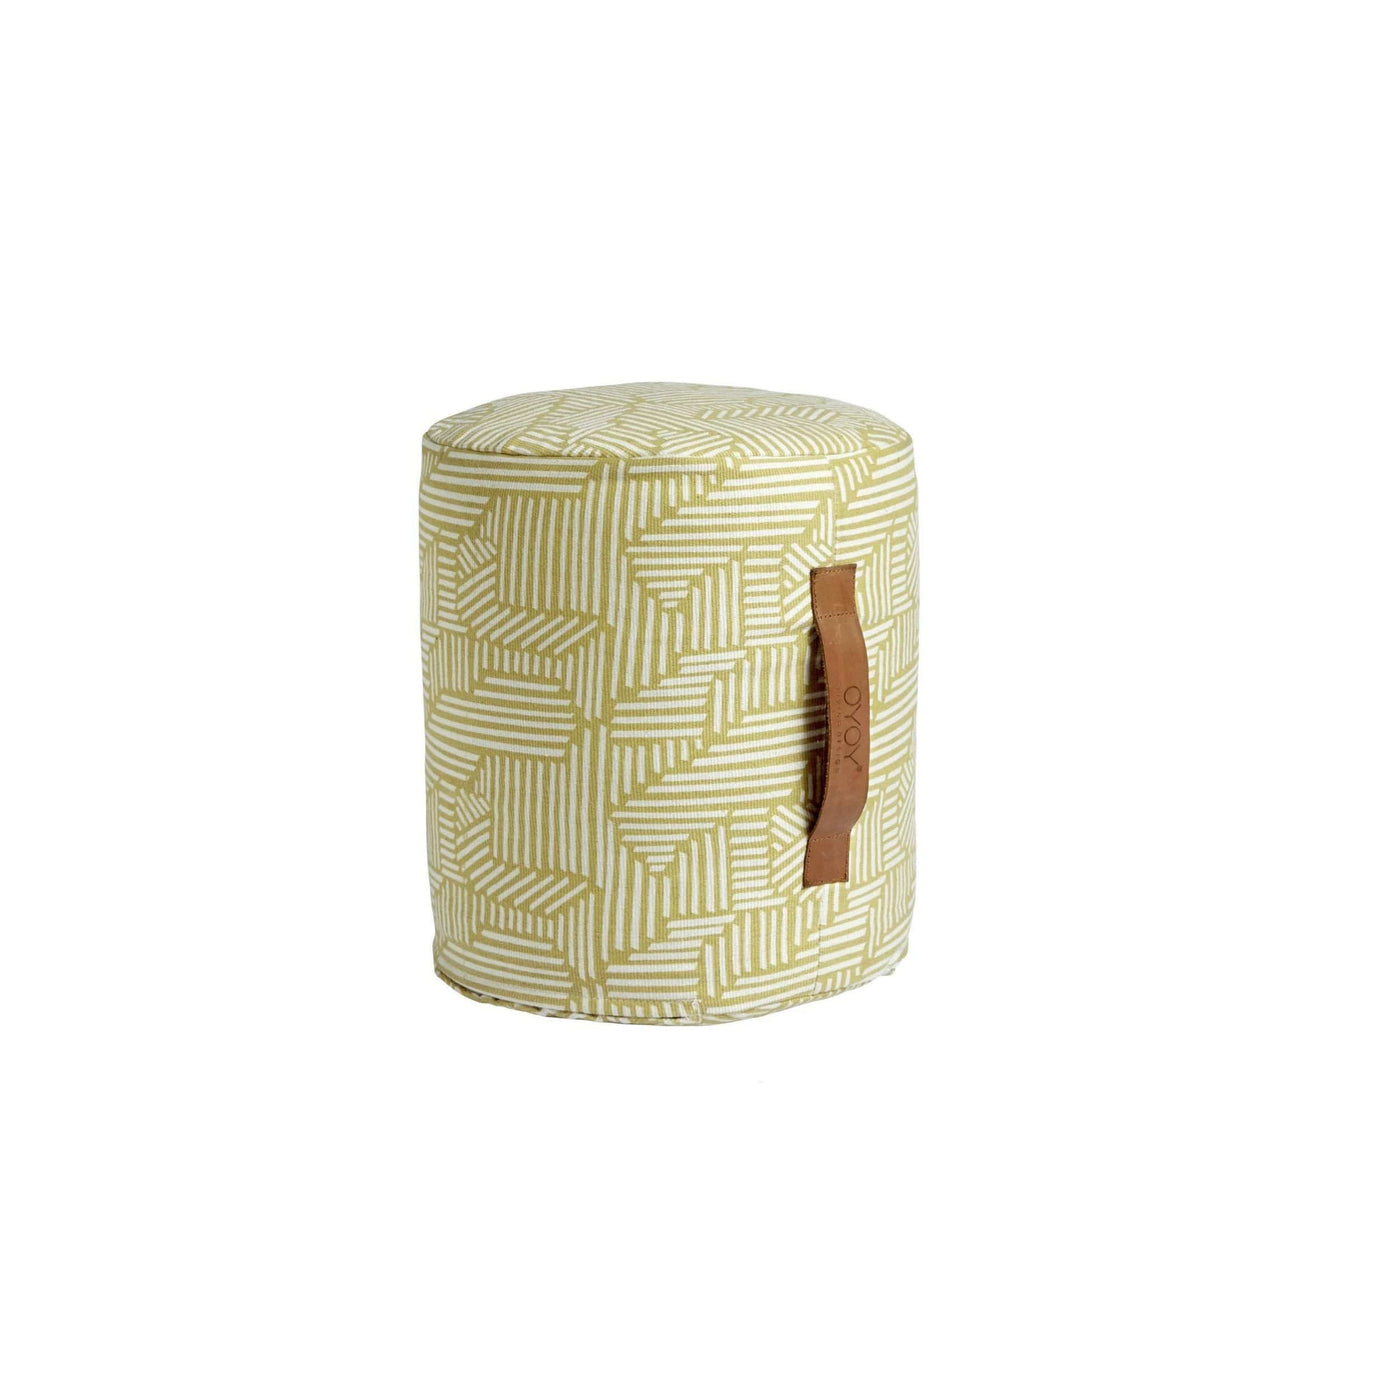 OYOY mini paddy pouf cylinder is a stylish geometric seating solution for a childrens room. Pictured here in bamboo with leather handle detail. Shop online at someday designs